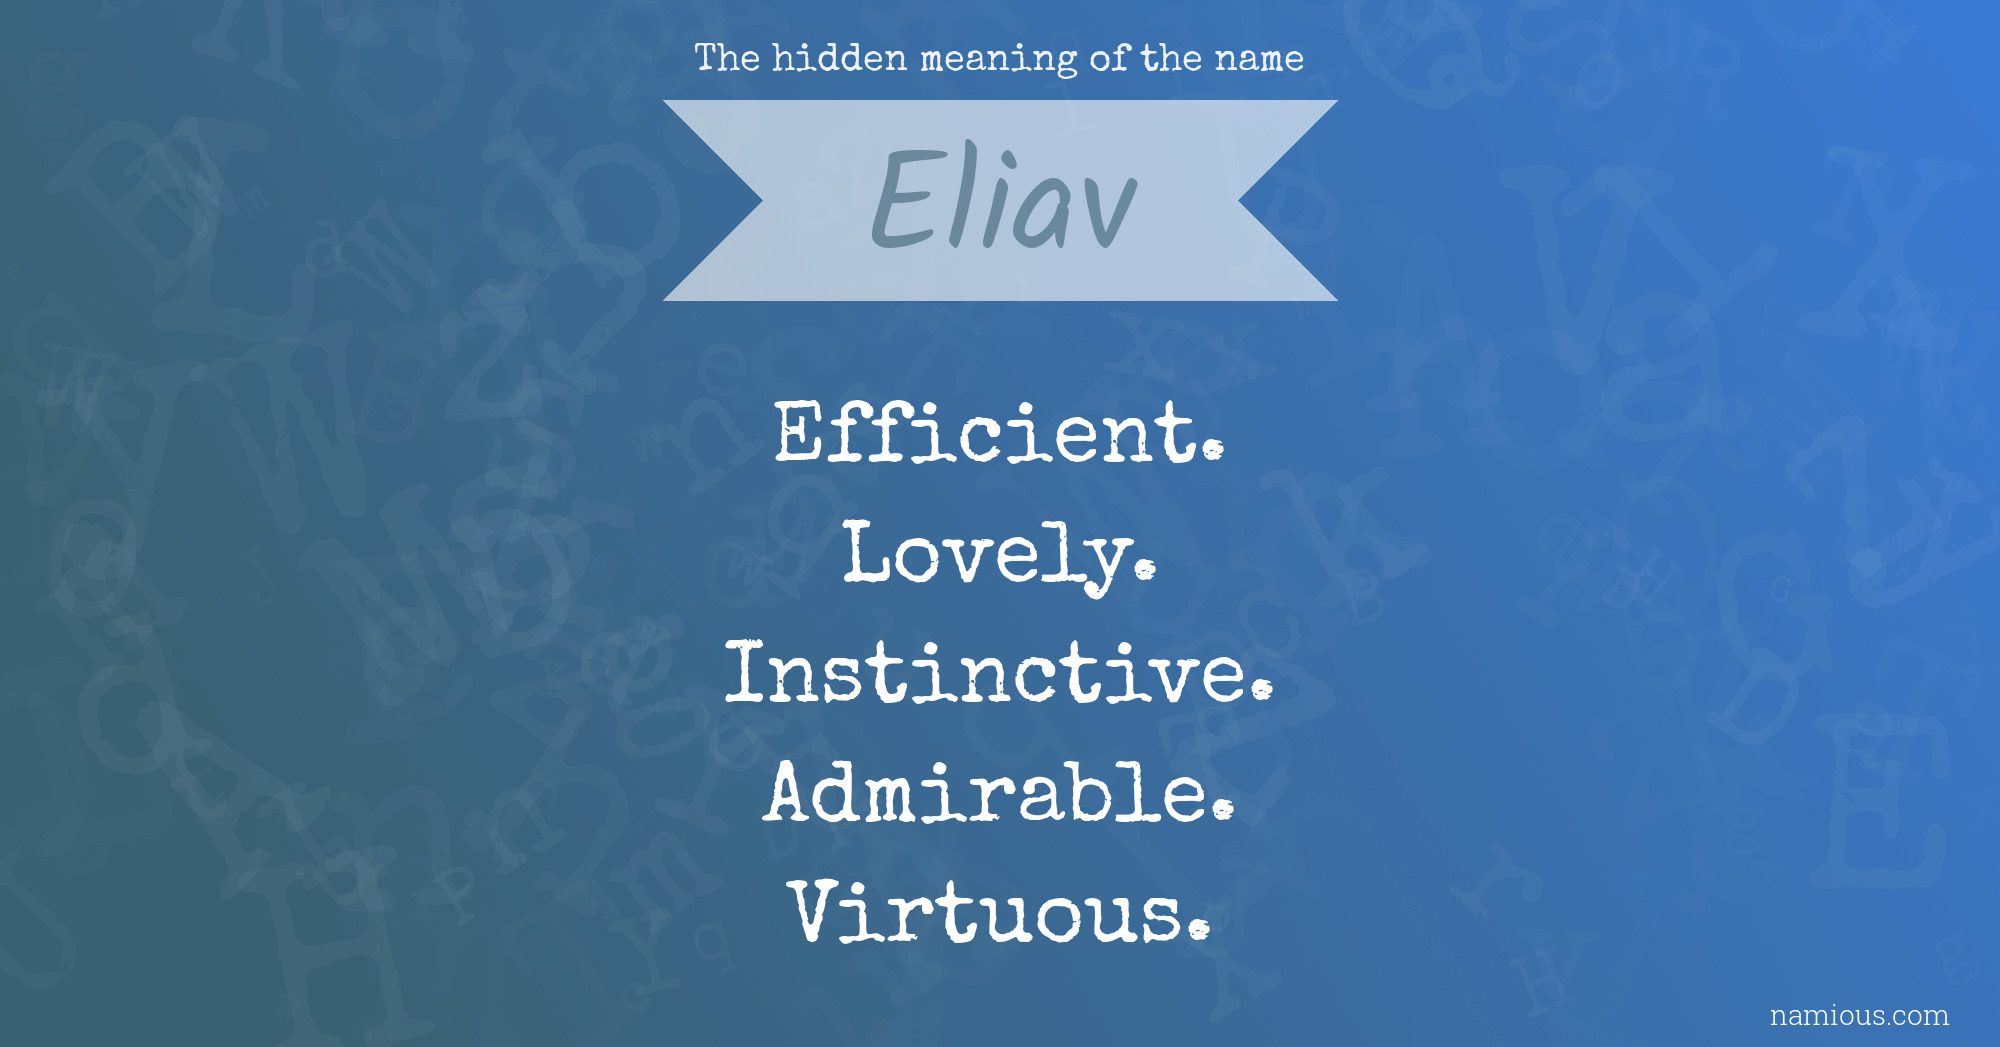 The hidden meaning of the name Eliav